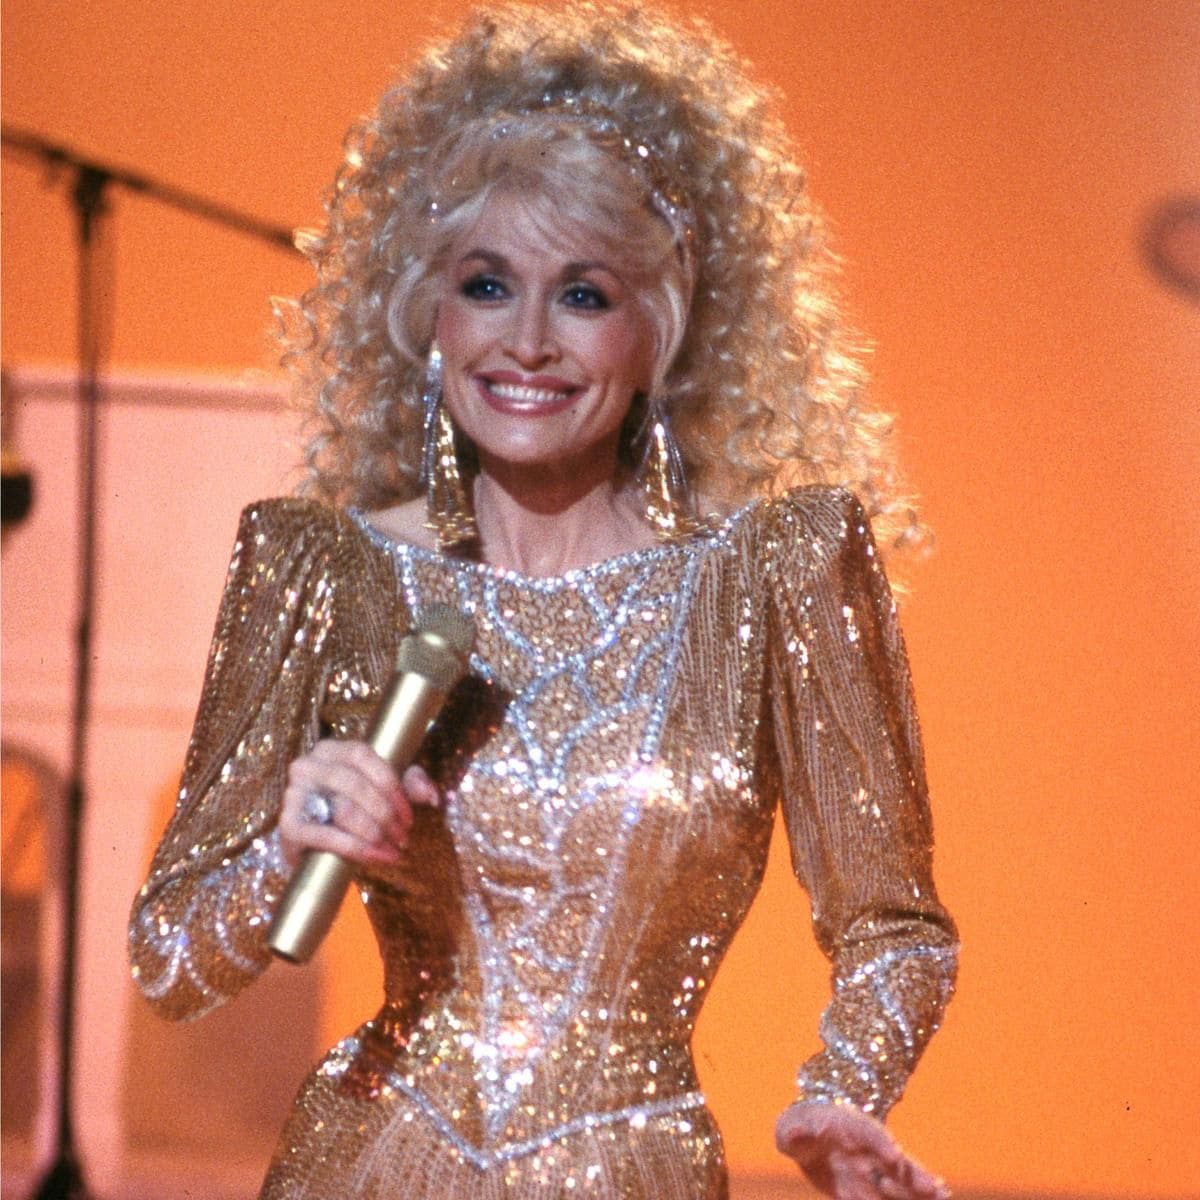 Dolly Parton performing 'Dolly' in 1987